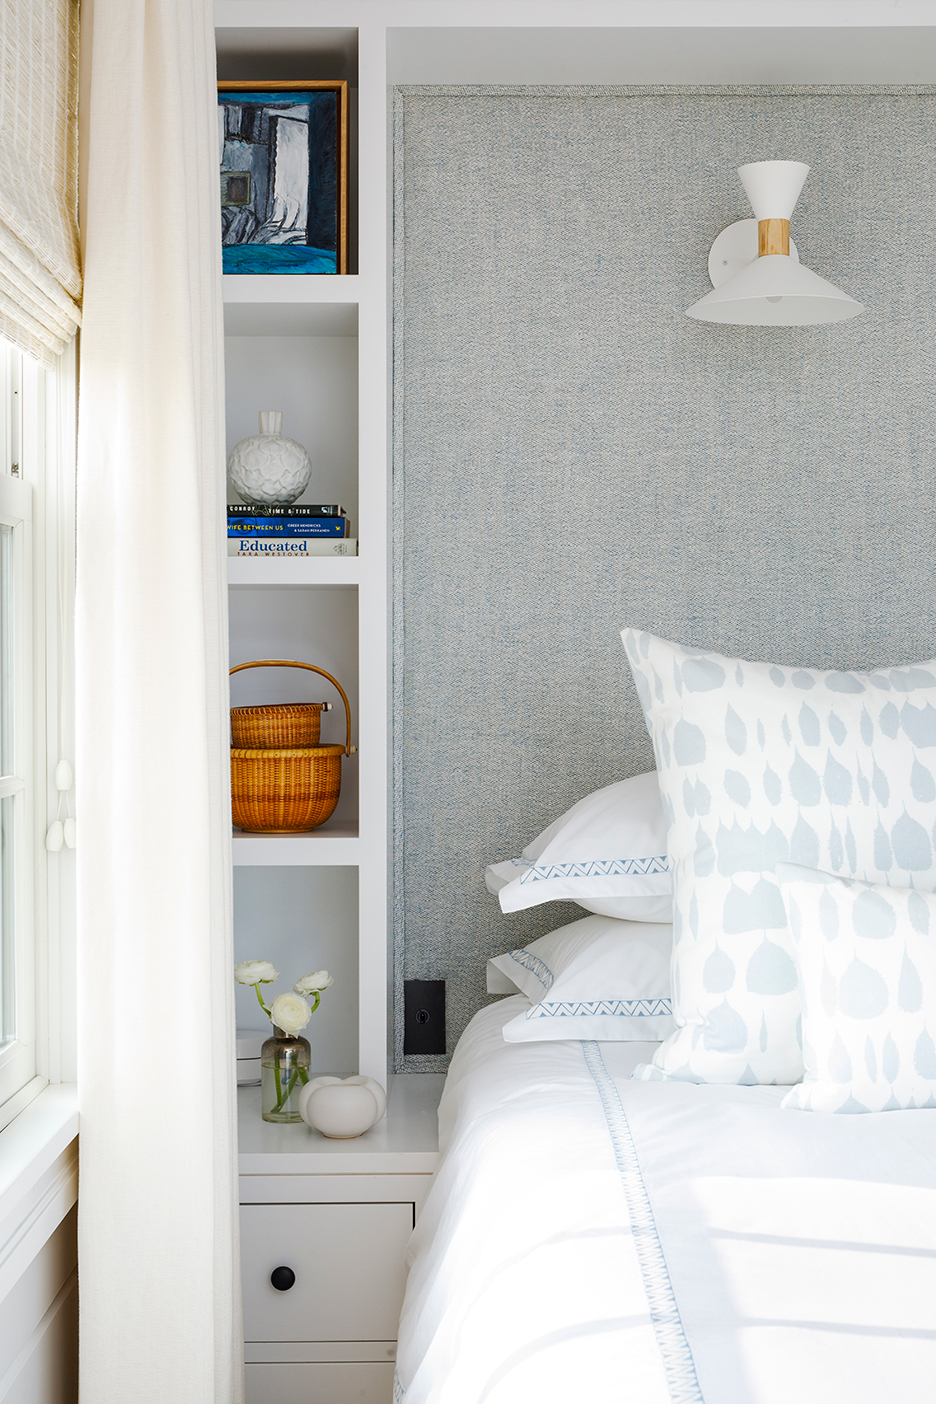 detail shot of pale blue and white bedding and bookshelf nightstand